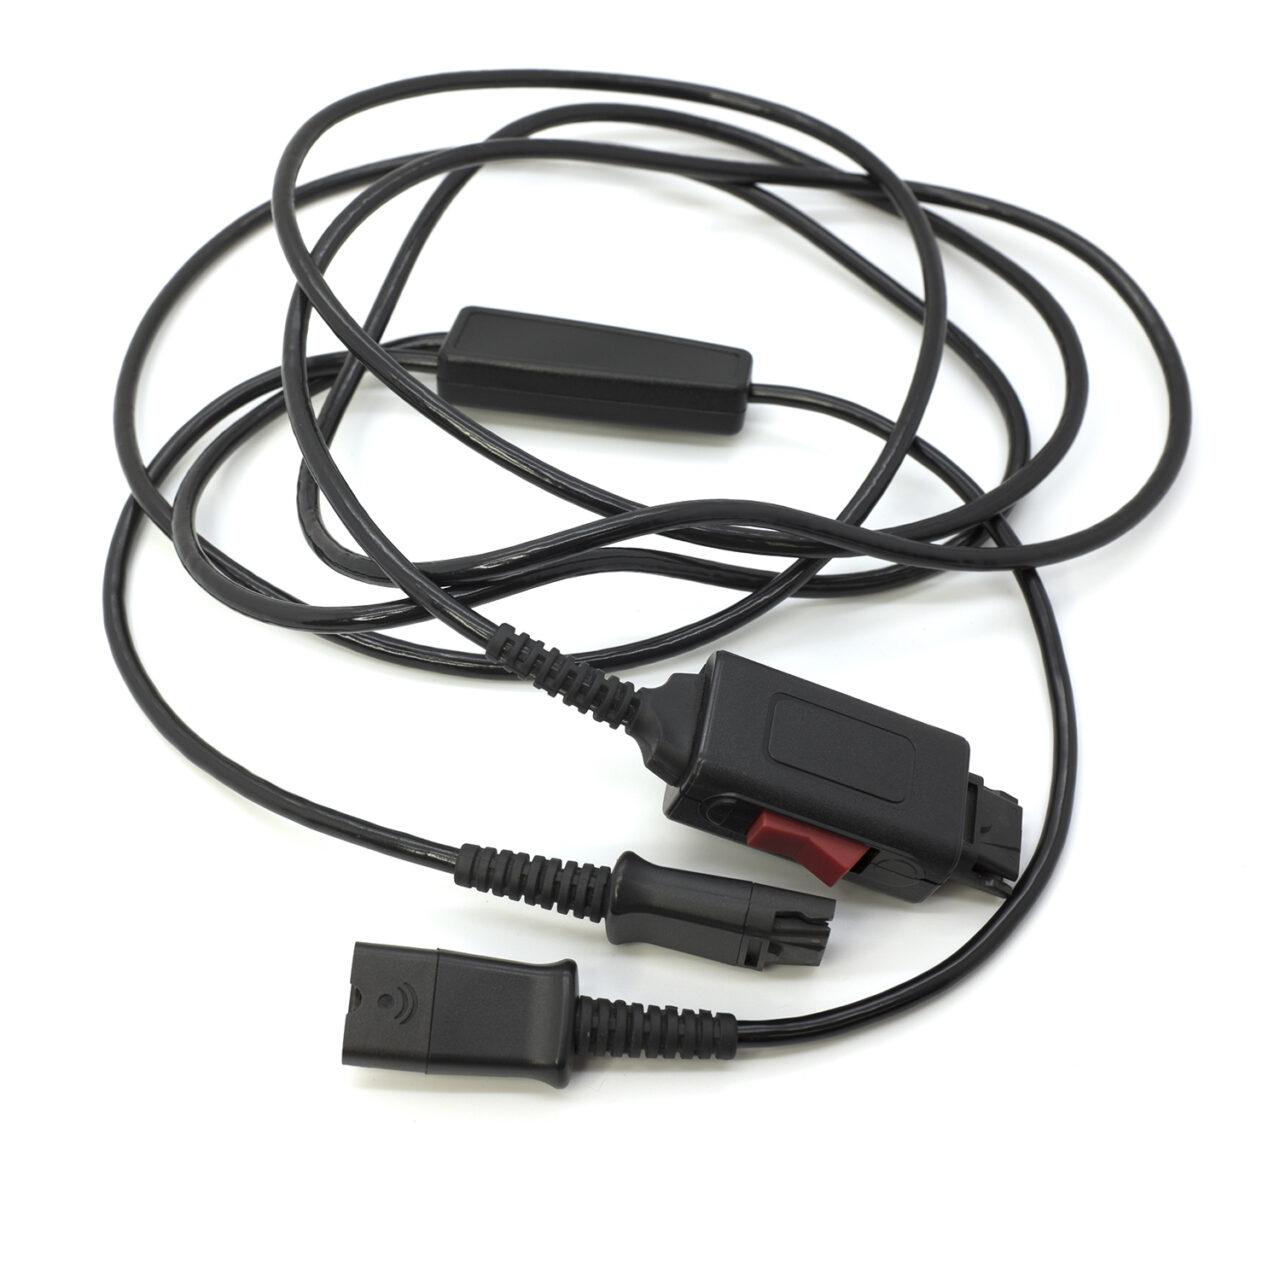 Plantronics Y-cable training cord